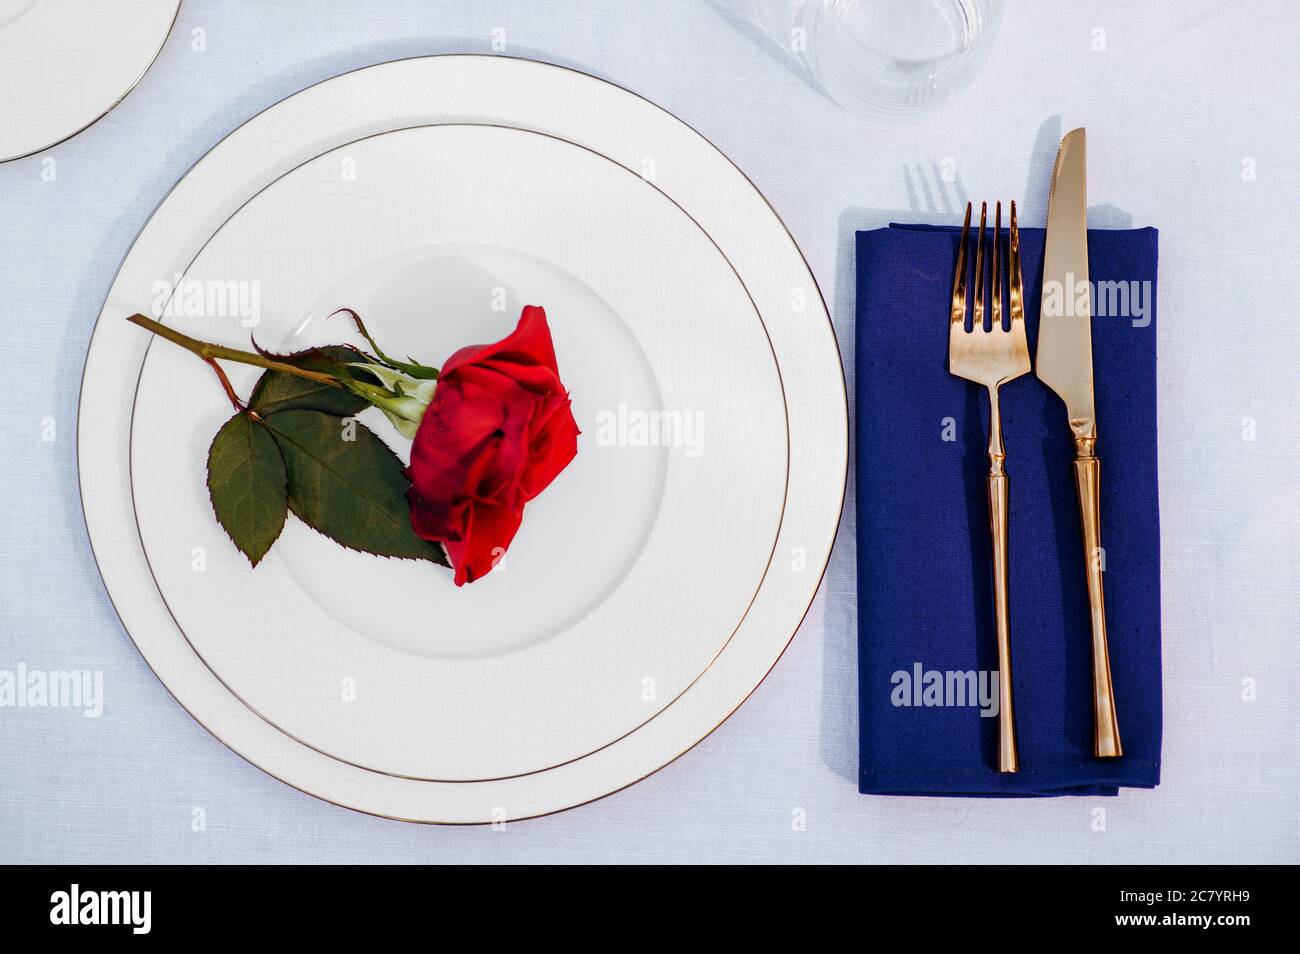 Table setting, silverware and red rose, top view Stock Photo